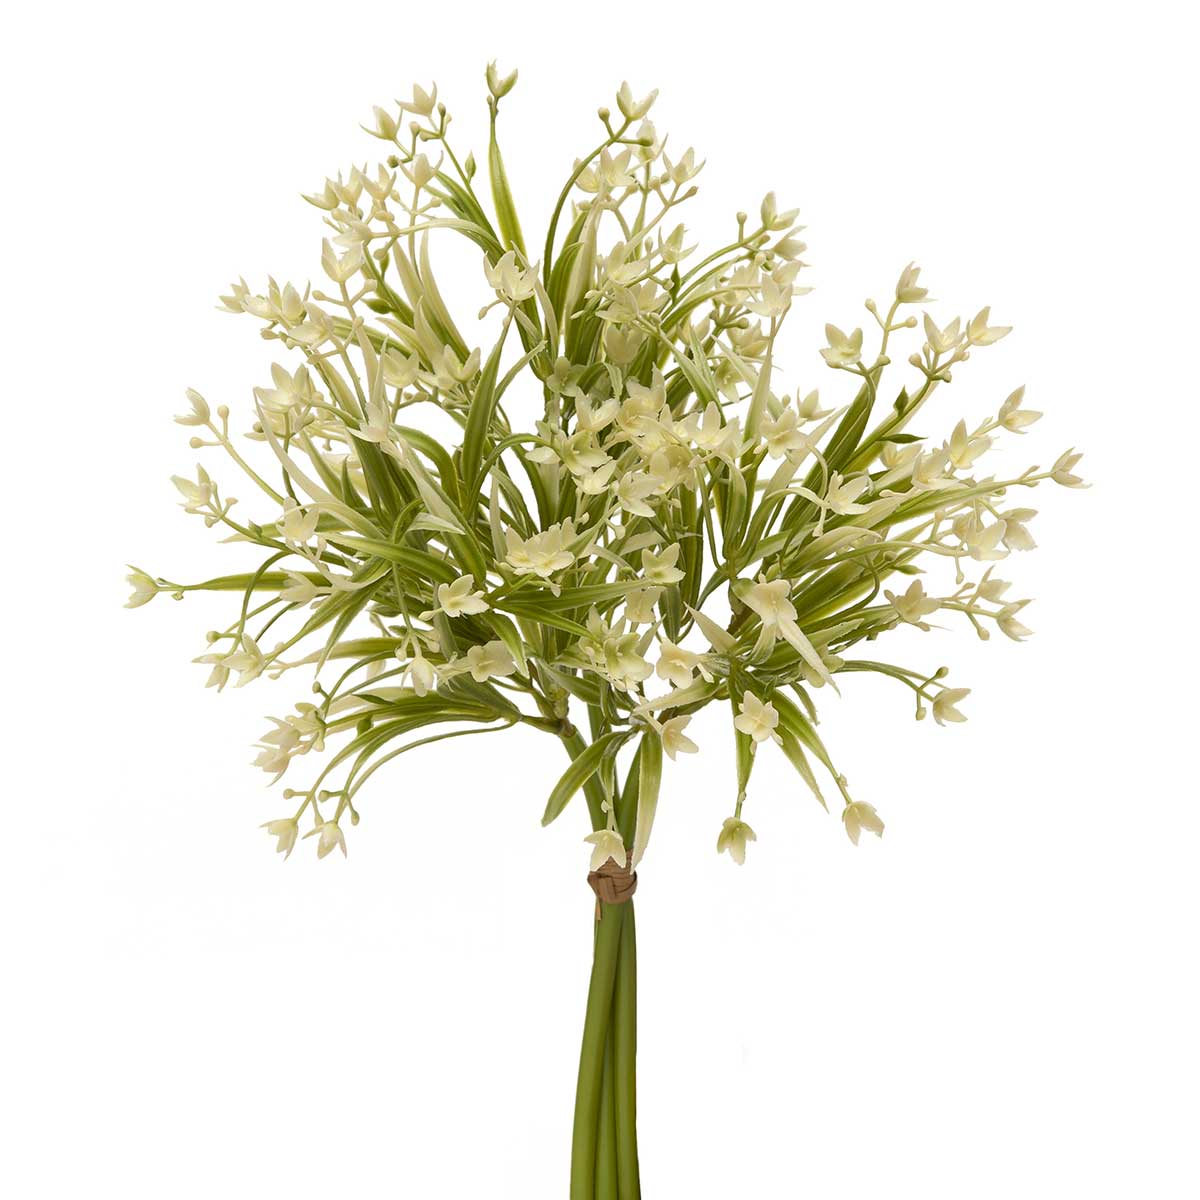 BUNDLE OF 3 FLOWER GRASS WHITE 9IN X 15IN TIED WITH RAFFIA